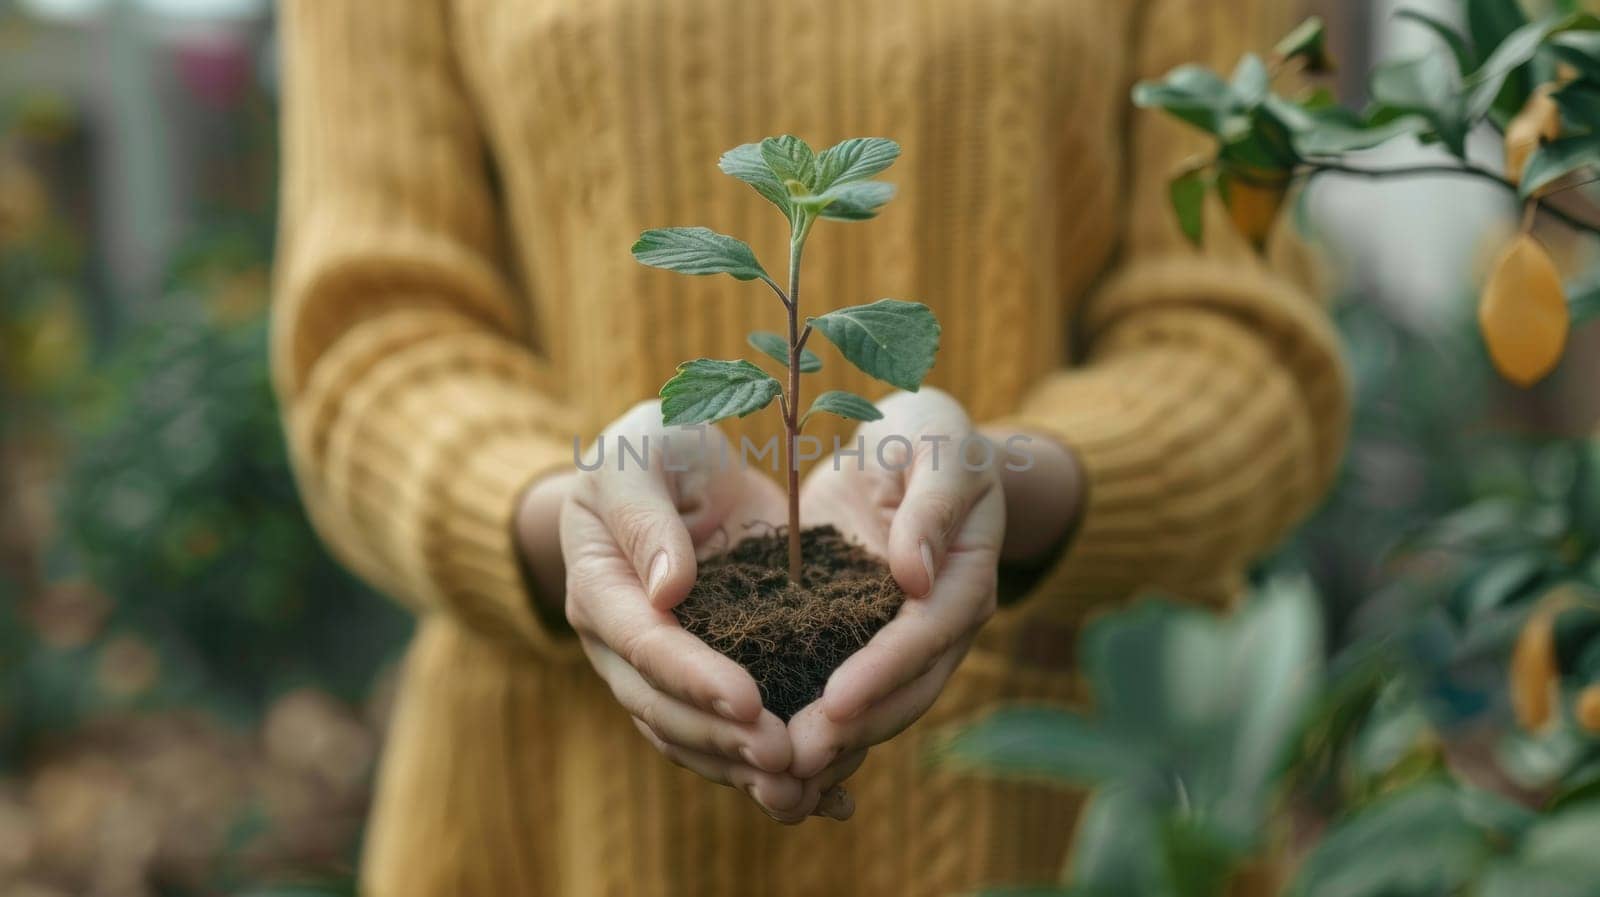 A person holding a small plant in their hands with soil